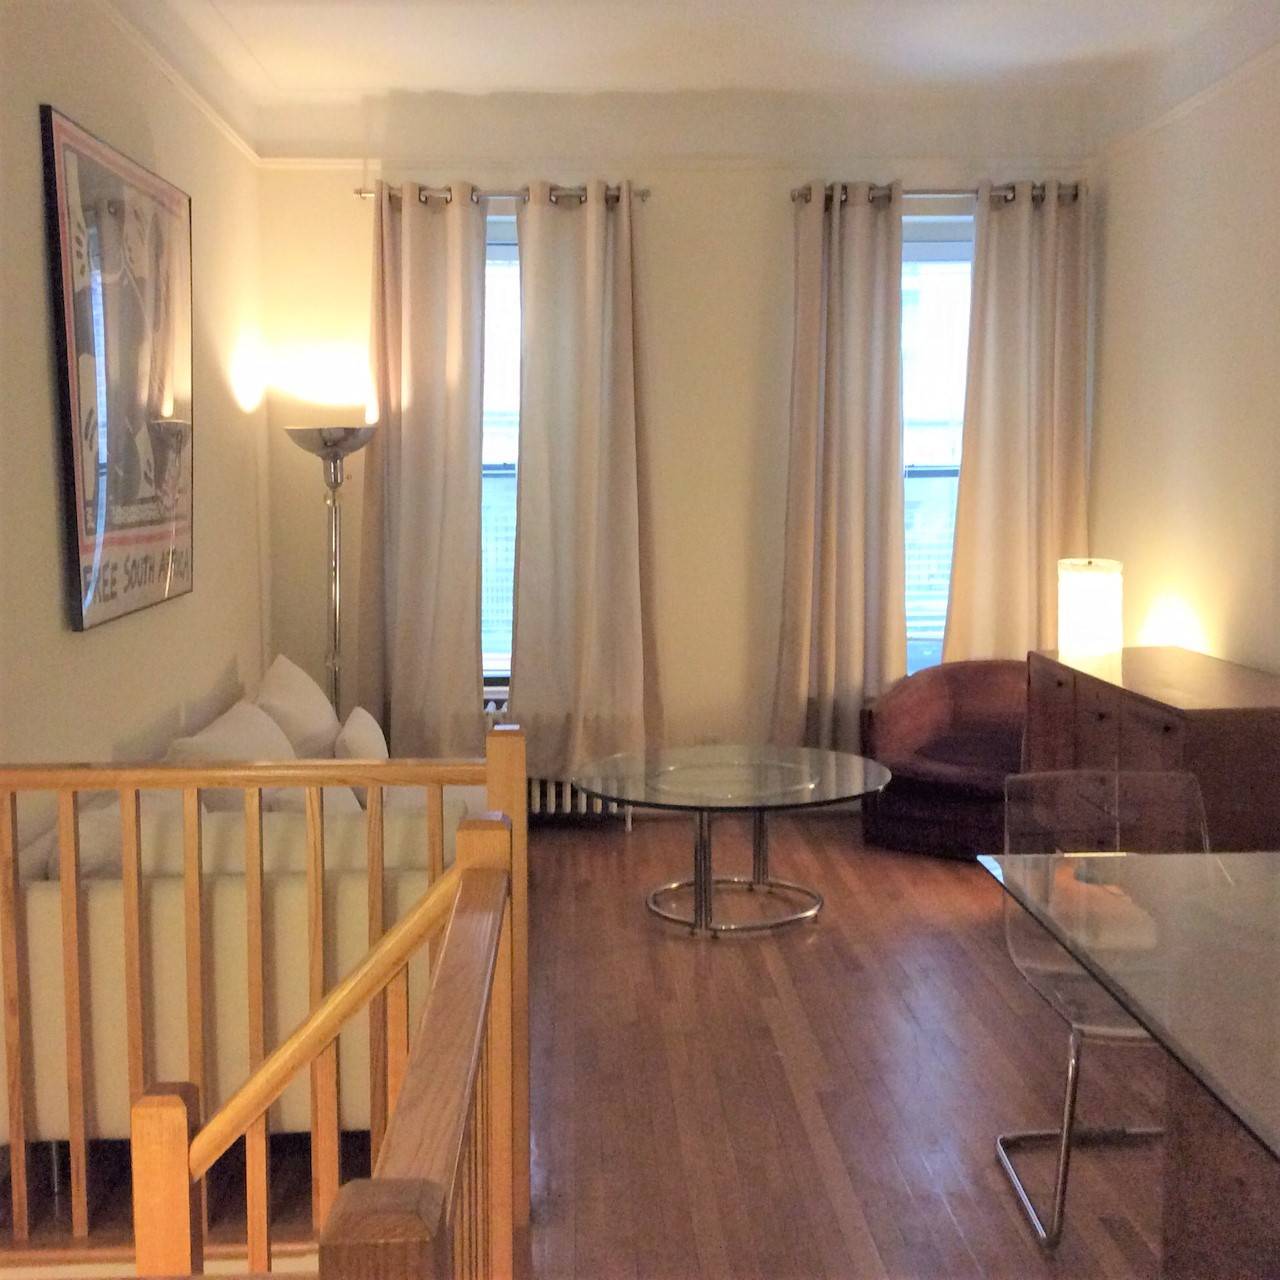 Upper West Side, right across Central Park West, furnished 3 bedroom 1, 5 bathroom duplex in a brownstone building.